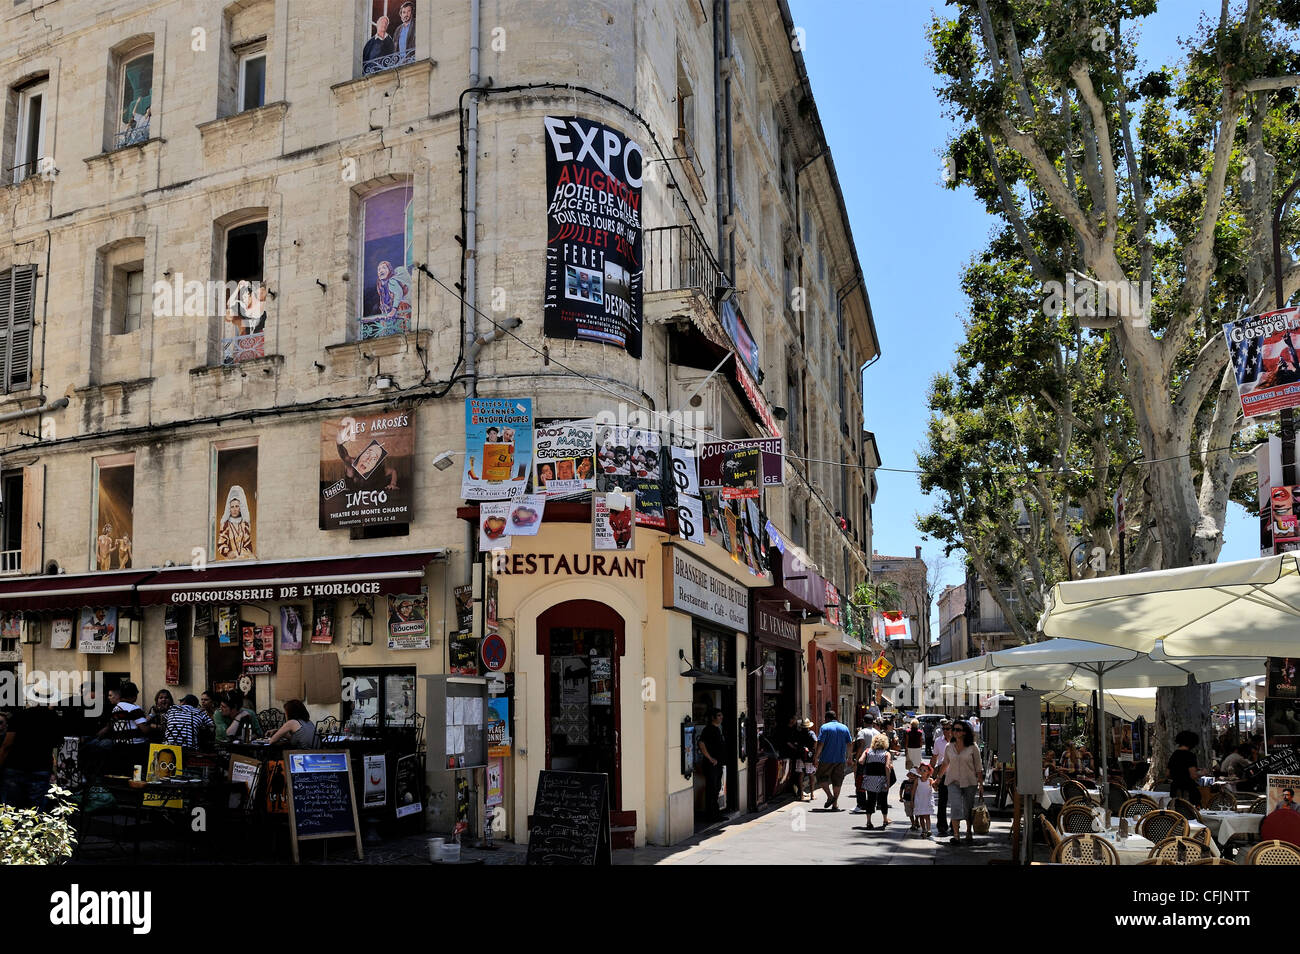 Posters advertising the theatre festival on a building with pictures painted on the windows, Avignon, Provence, France, Europe Stock Photo